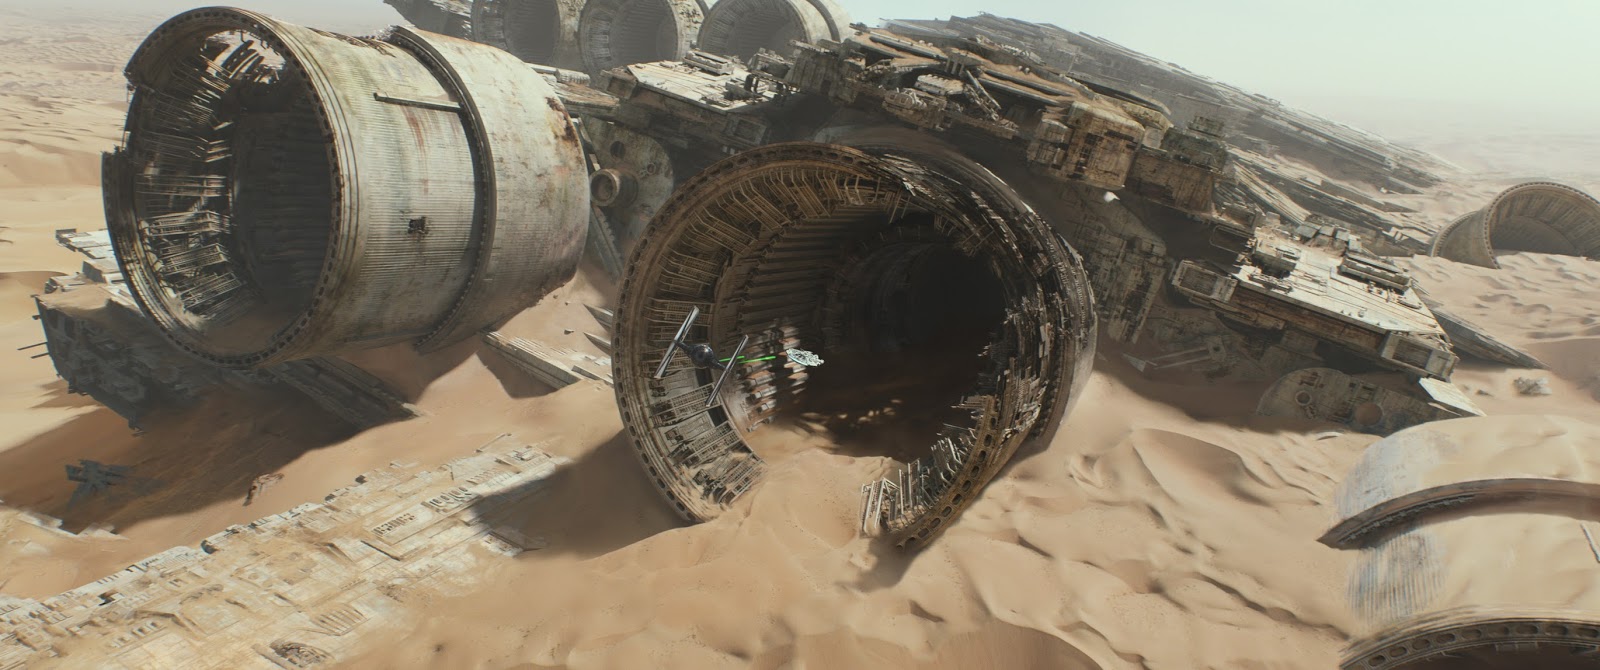 STAR WARS: THE FORCE AWAKENS - 2 Millennium Falcon Images Worthy ...